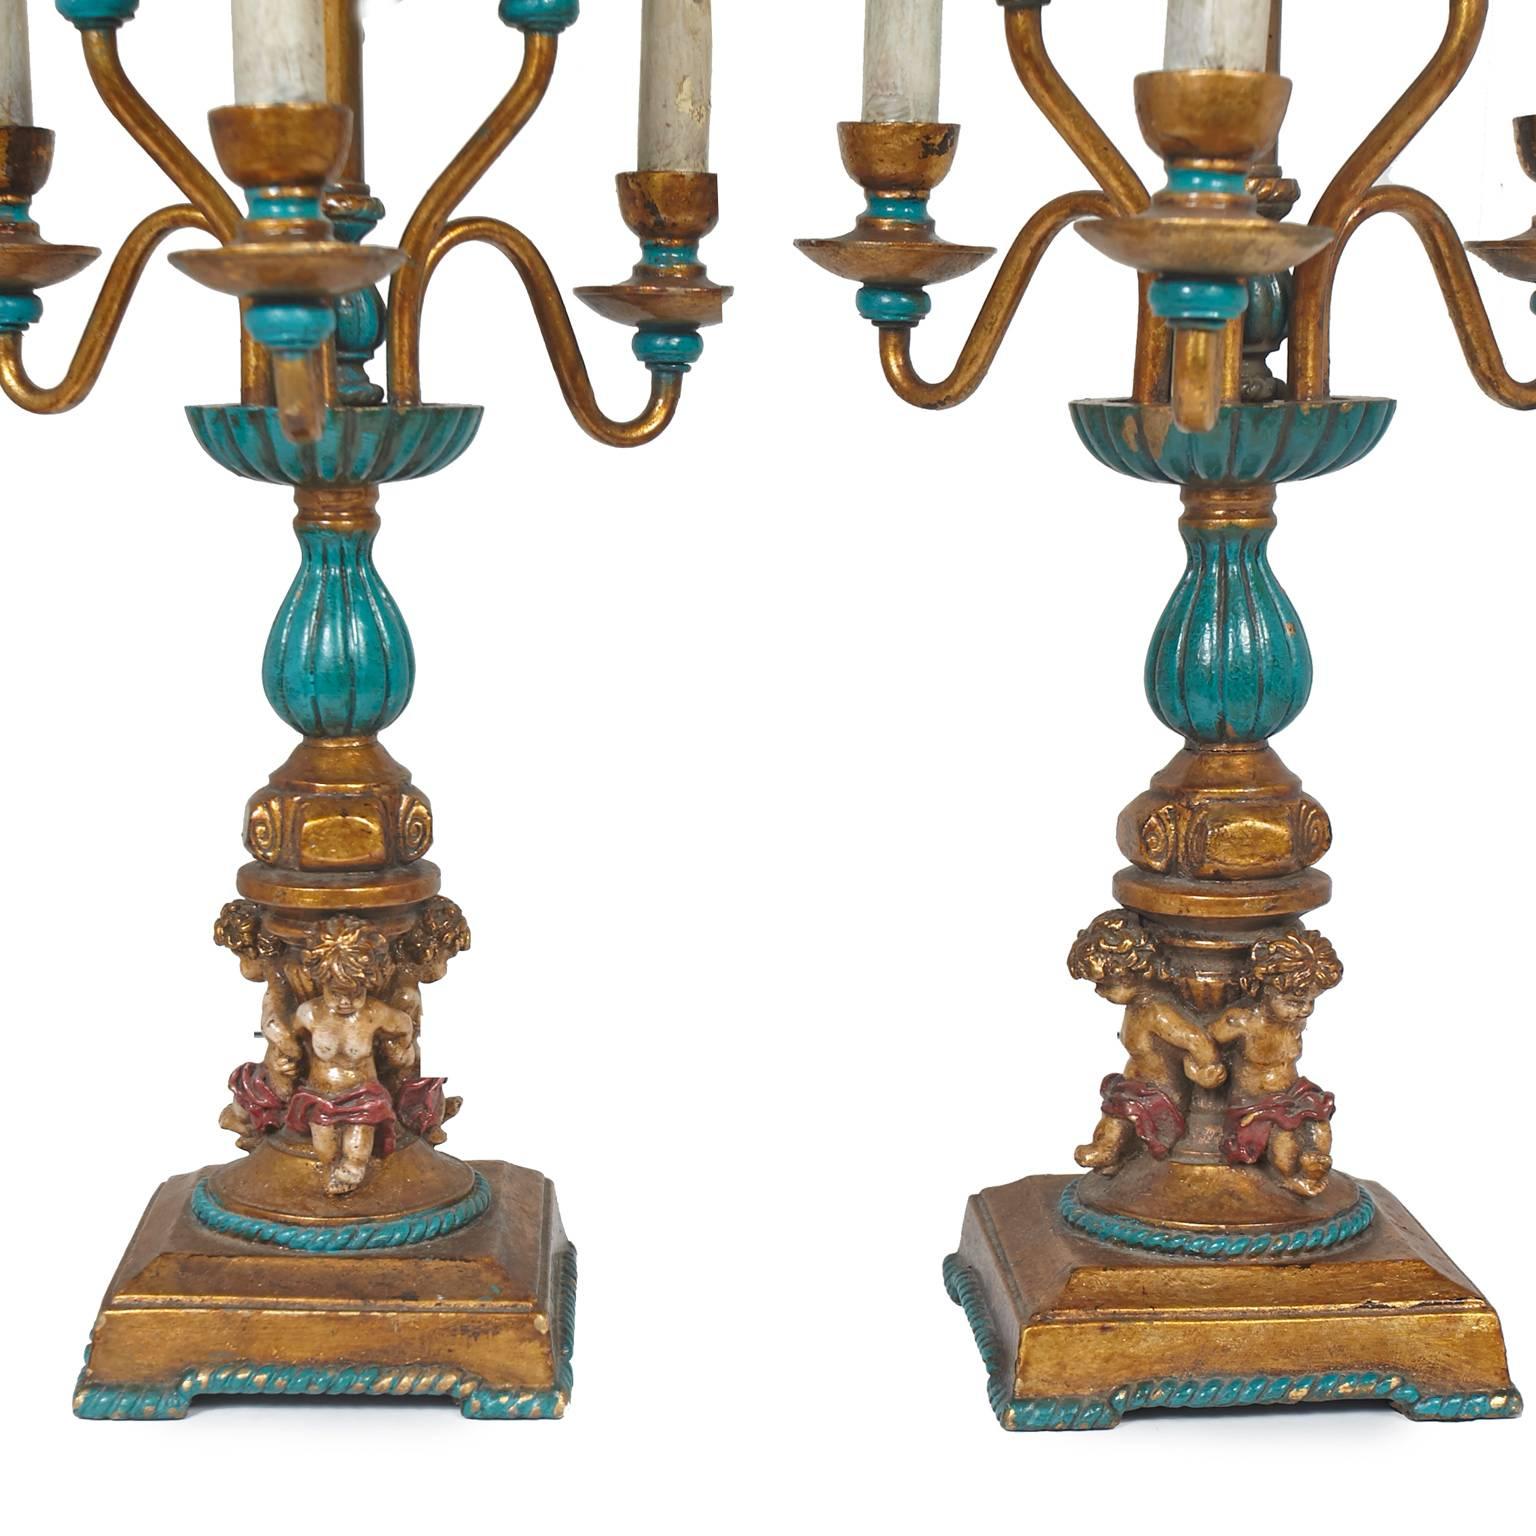 Other Exquisite Pair of French Inspired Candelabra Lamps with Four Cherubs For Sale